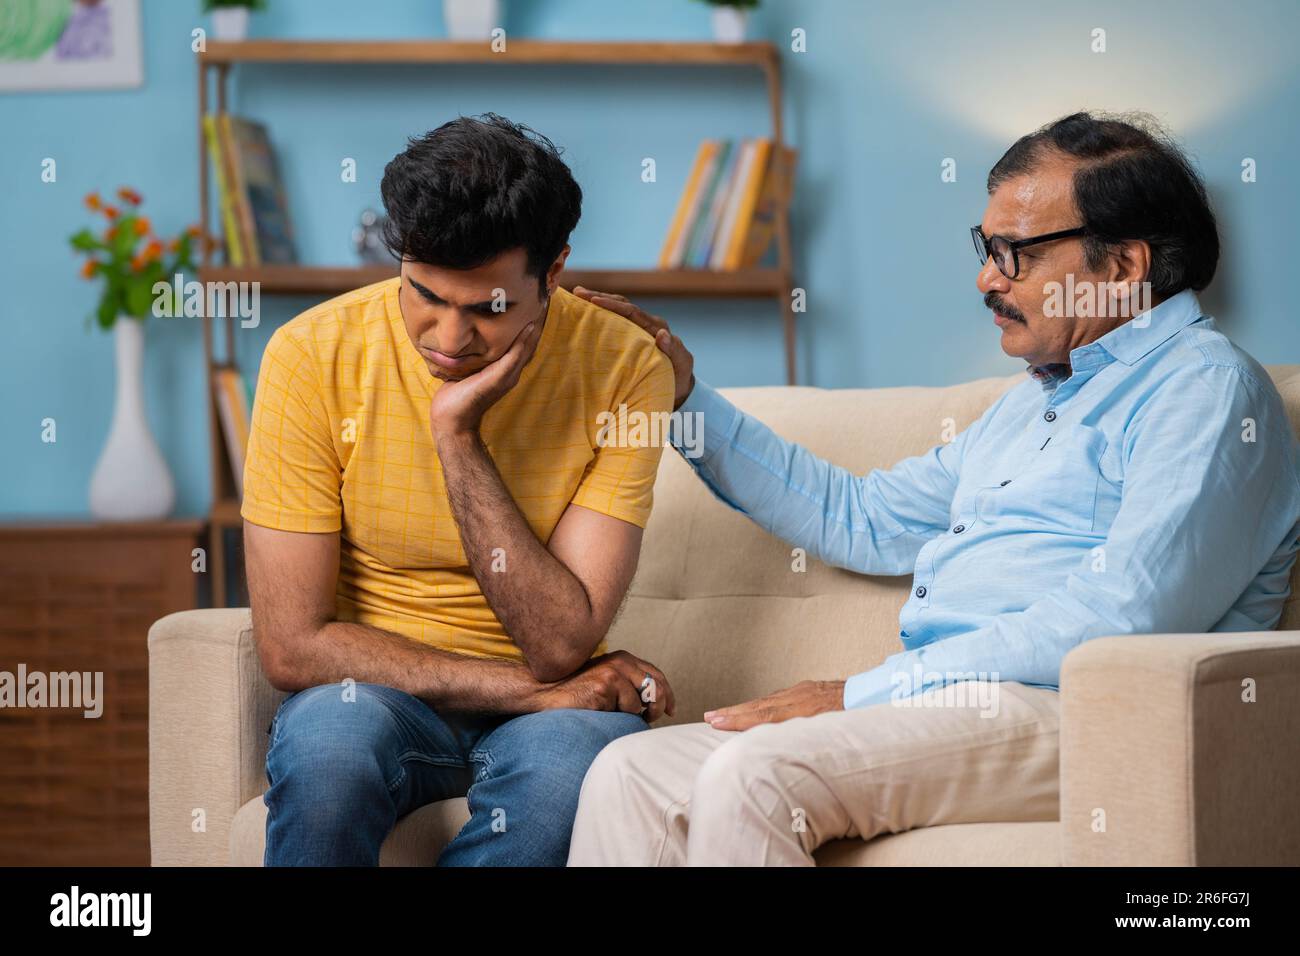 Indian senior father consoling by giving confidence to adult son at home - concept of depression, emotional comfort and caring parenthood. Stock Photo